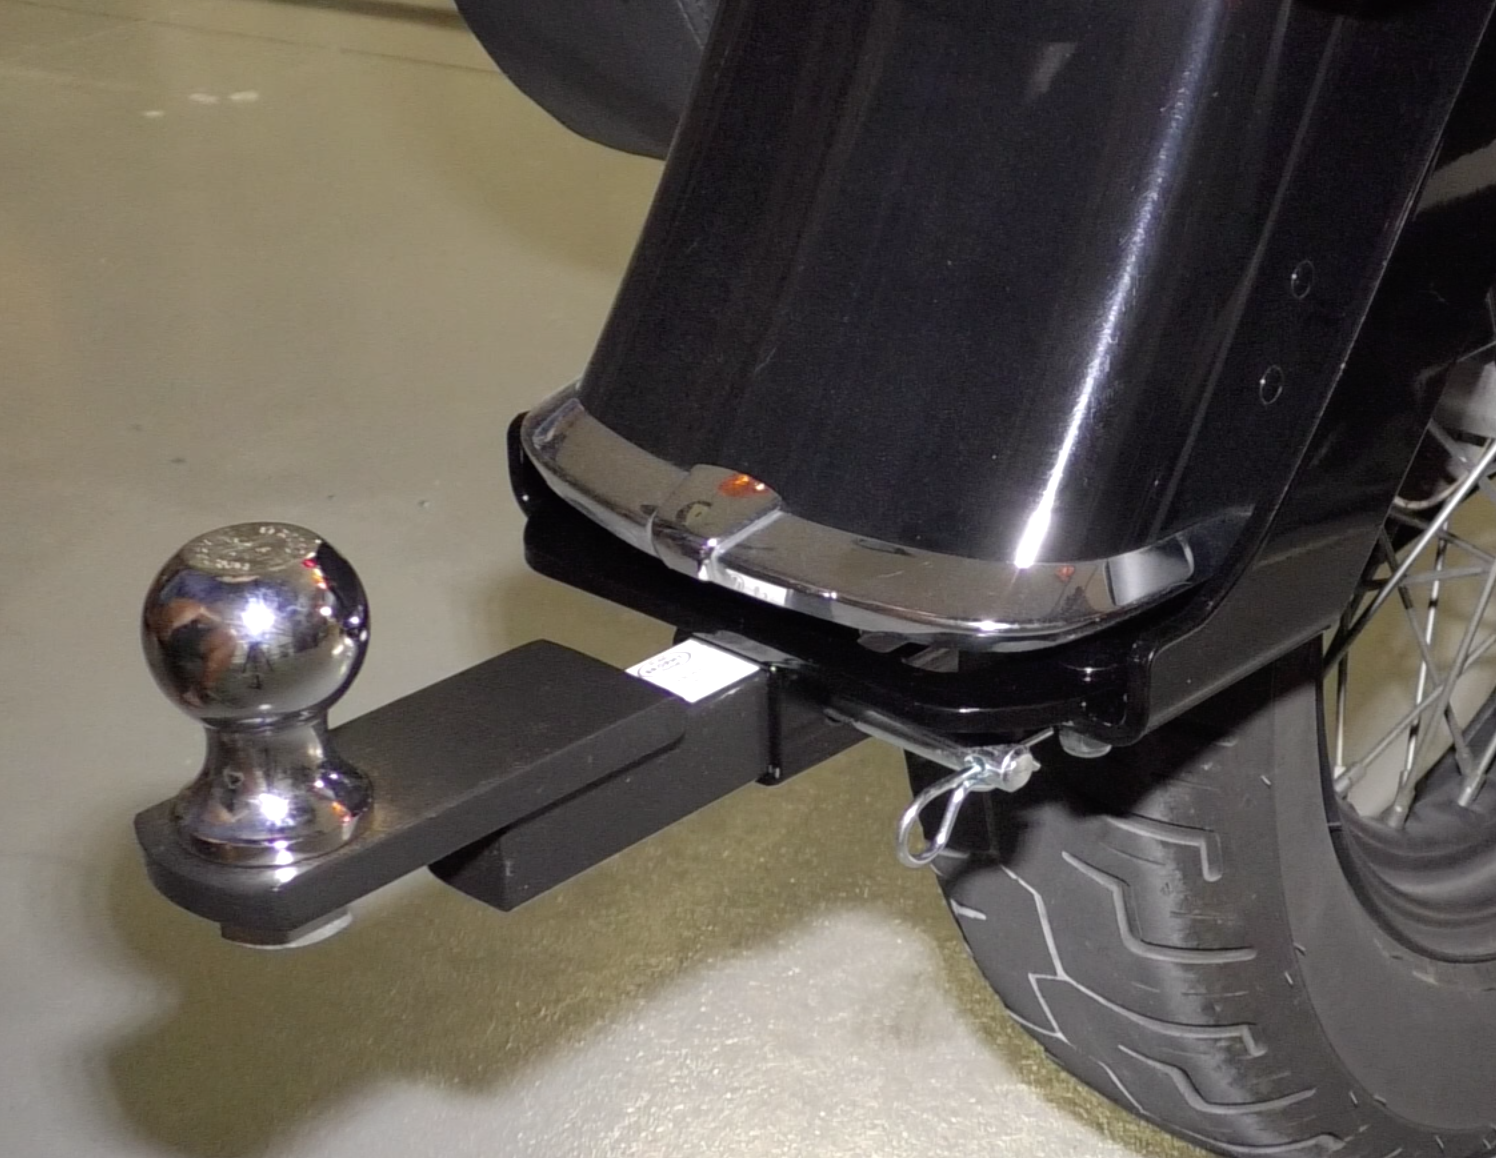 2018 Hidden Harley Softail Trailer Hitch H10-310 with Removable Tow Bar and Ball